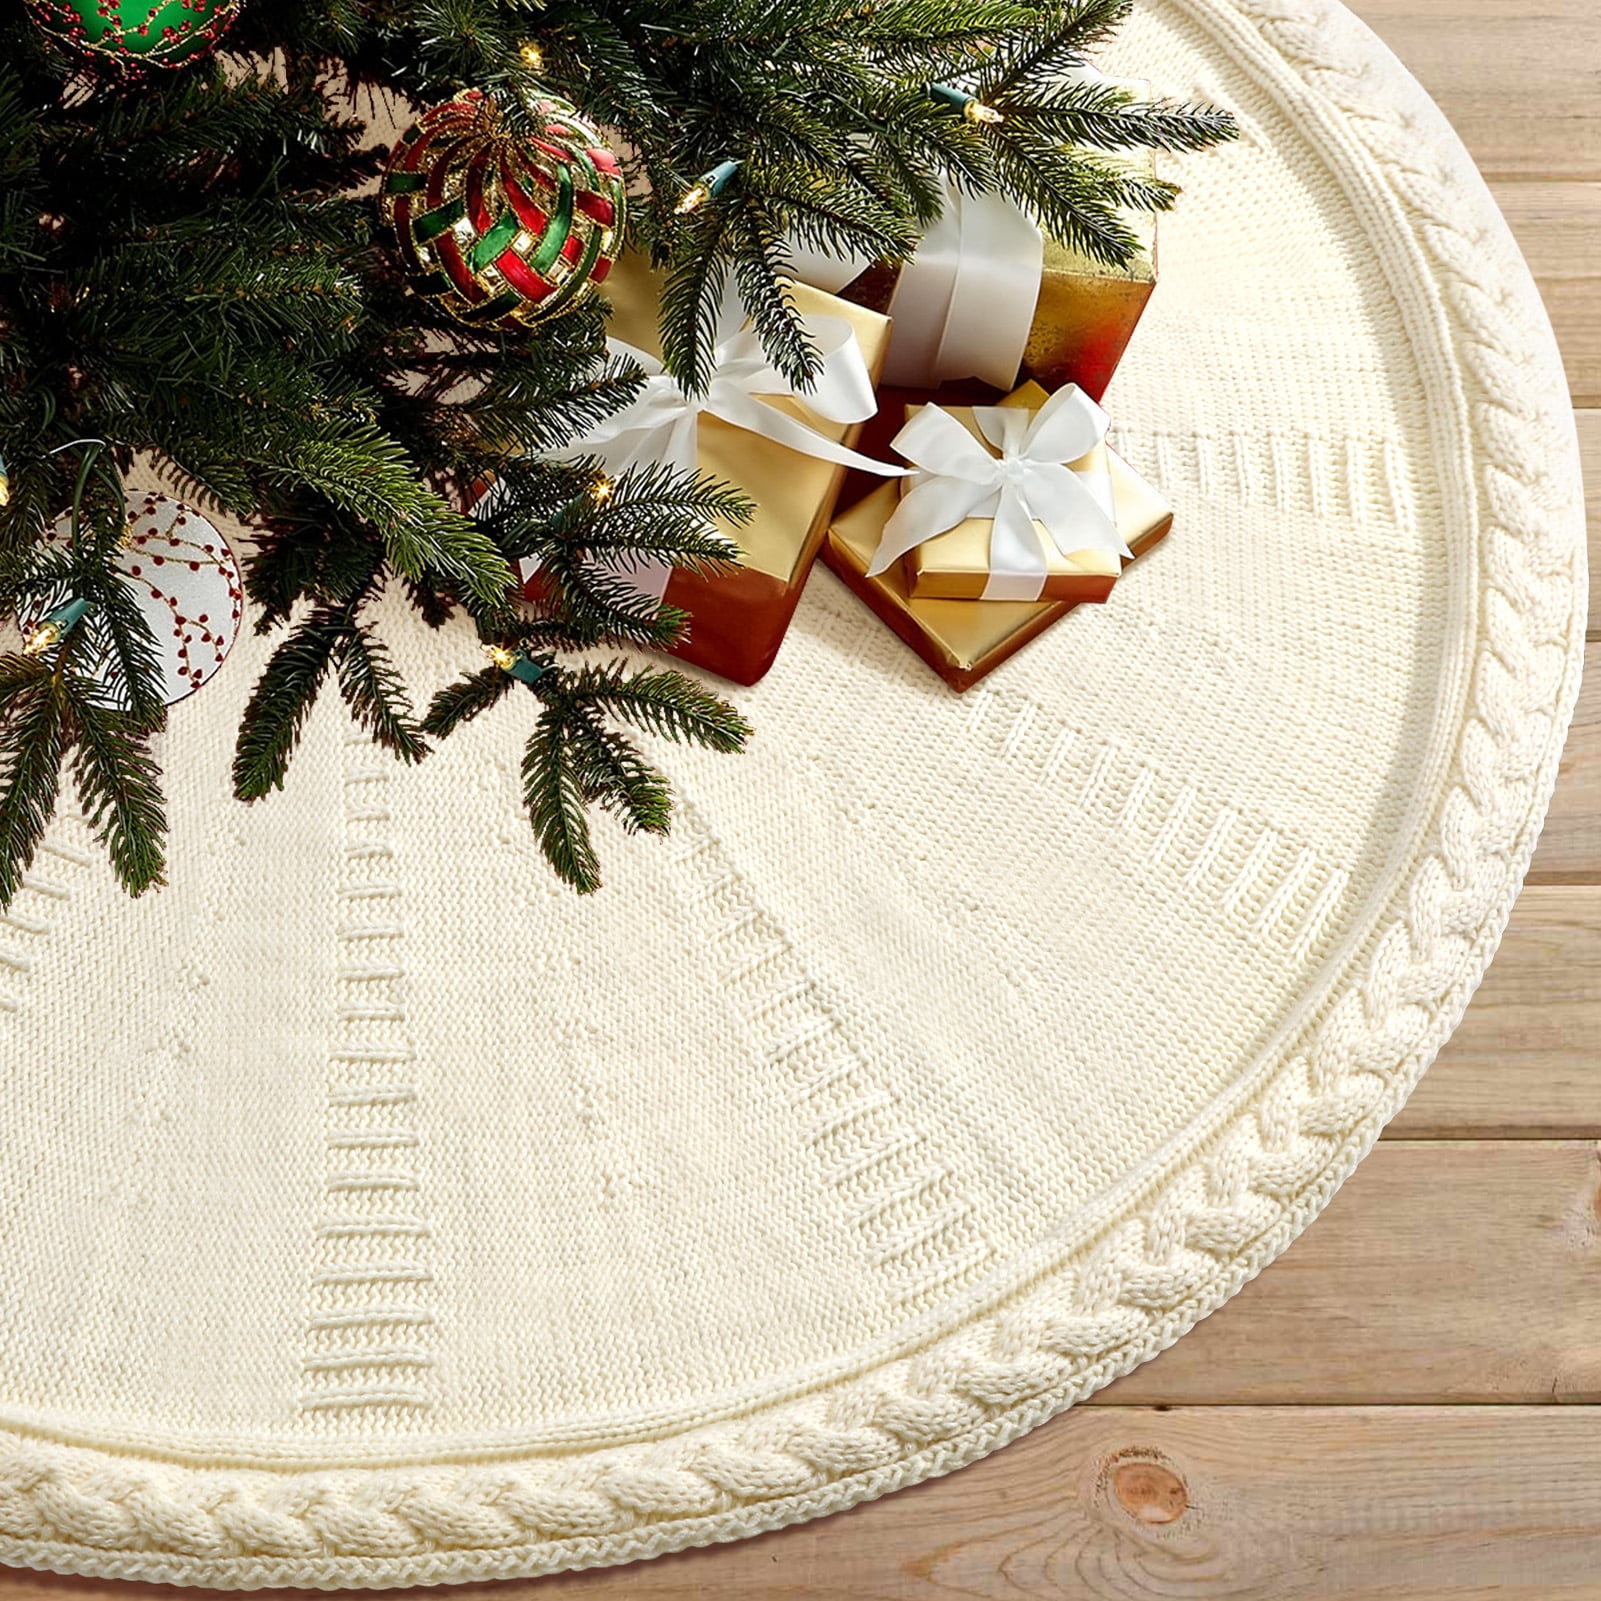 Ayieyill Christmas Tree Skirt, 48 inches White Tree Skirt Luxury Cable ...